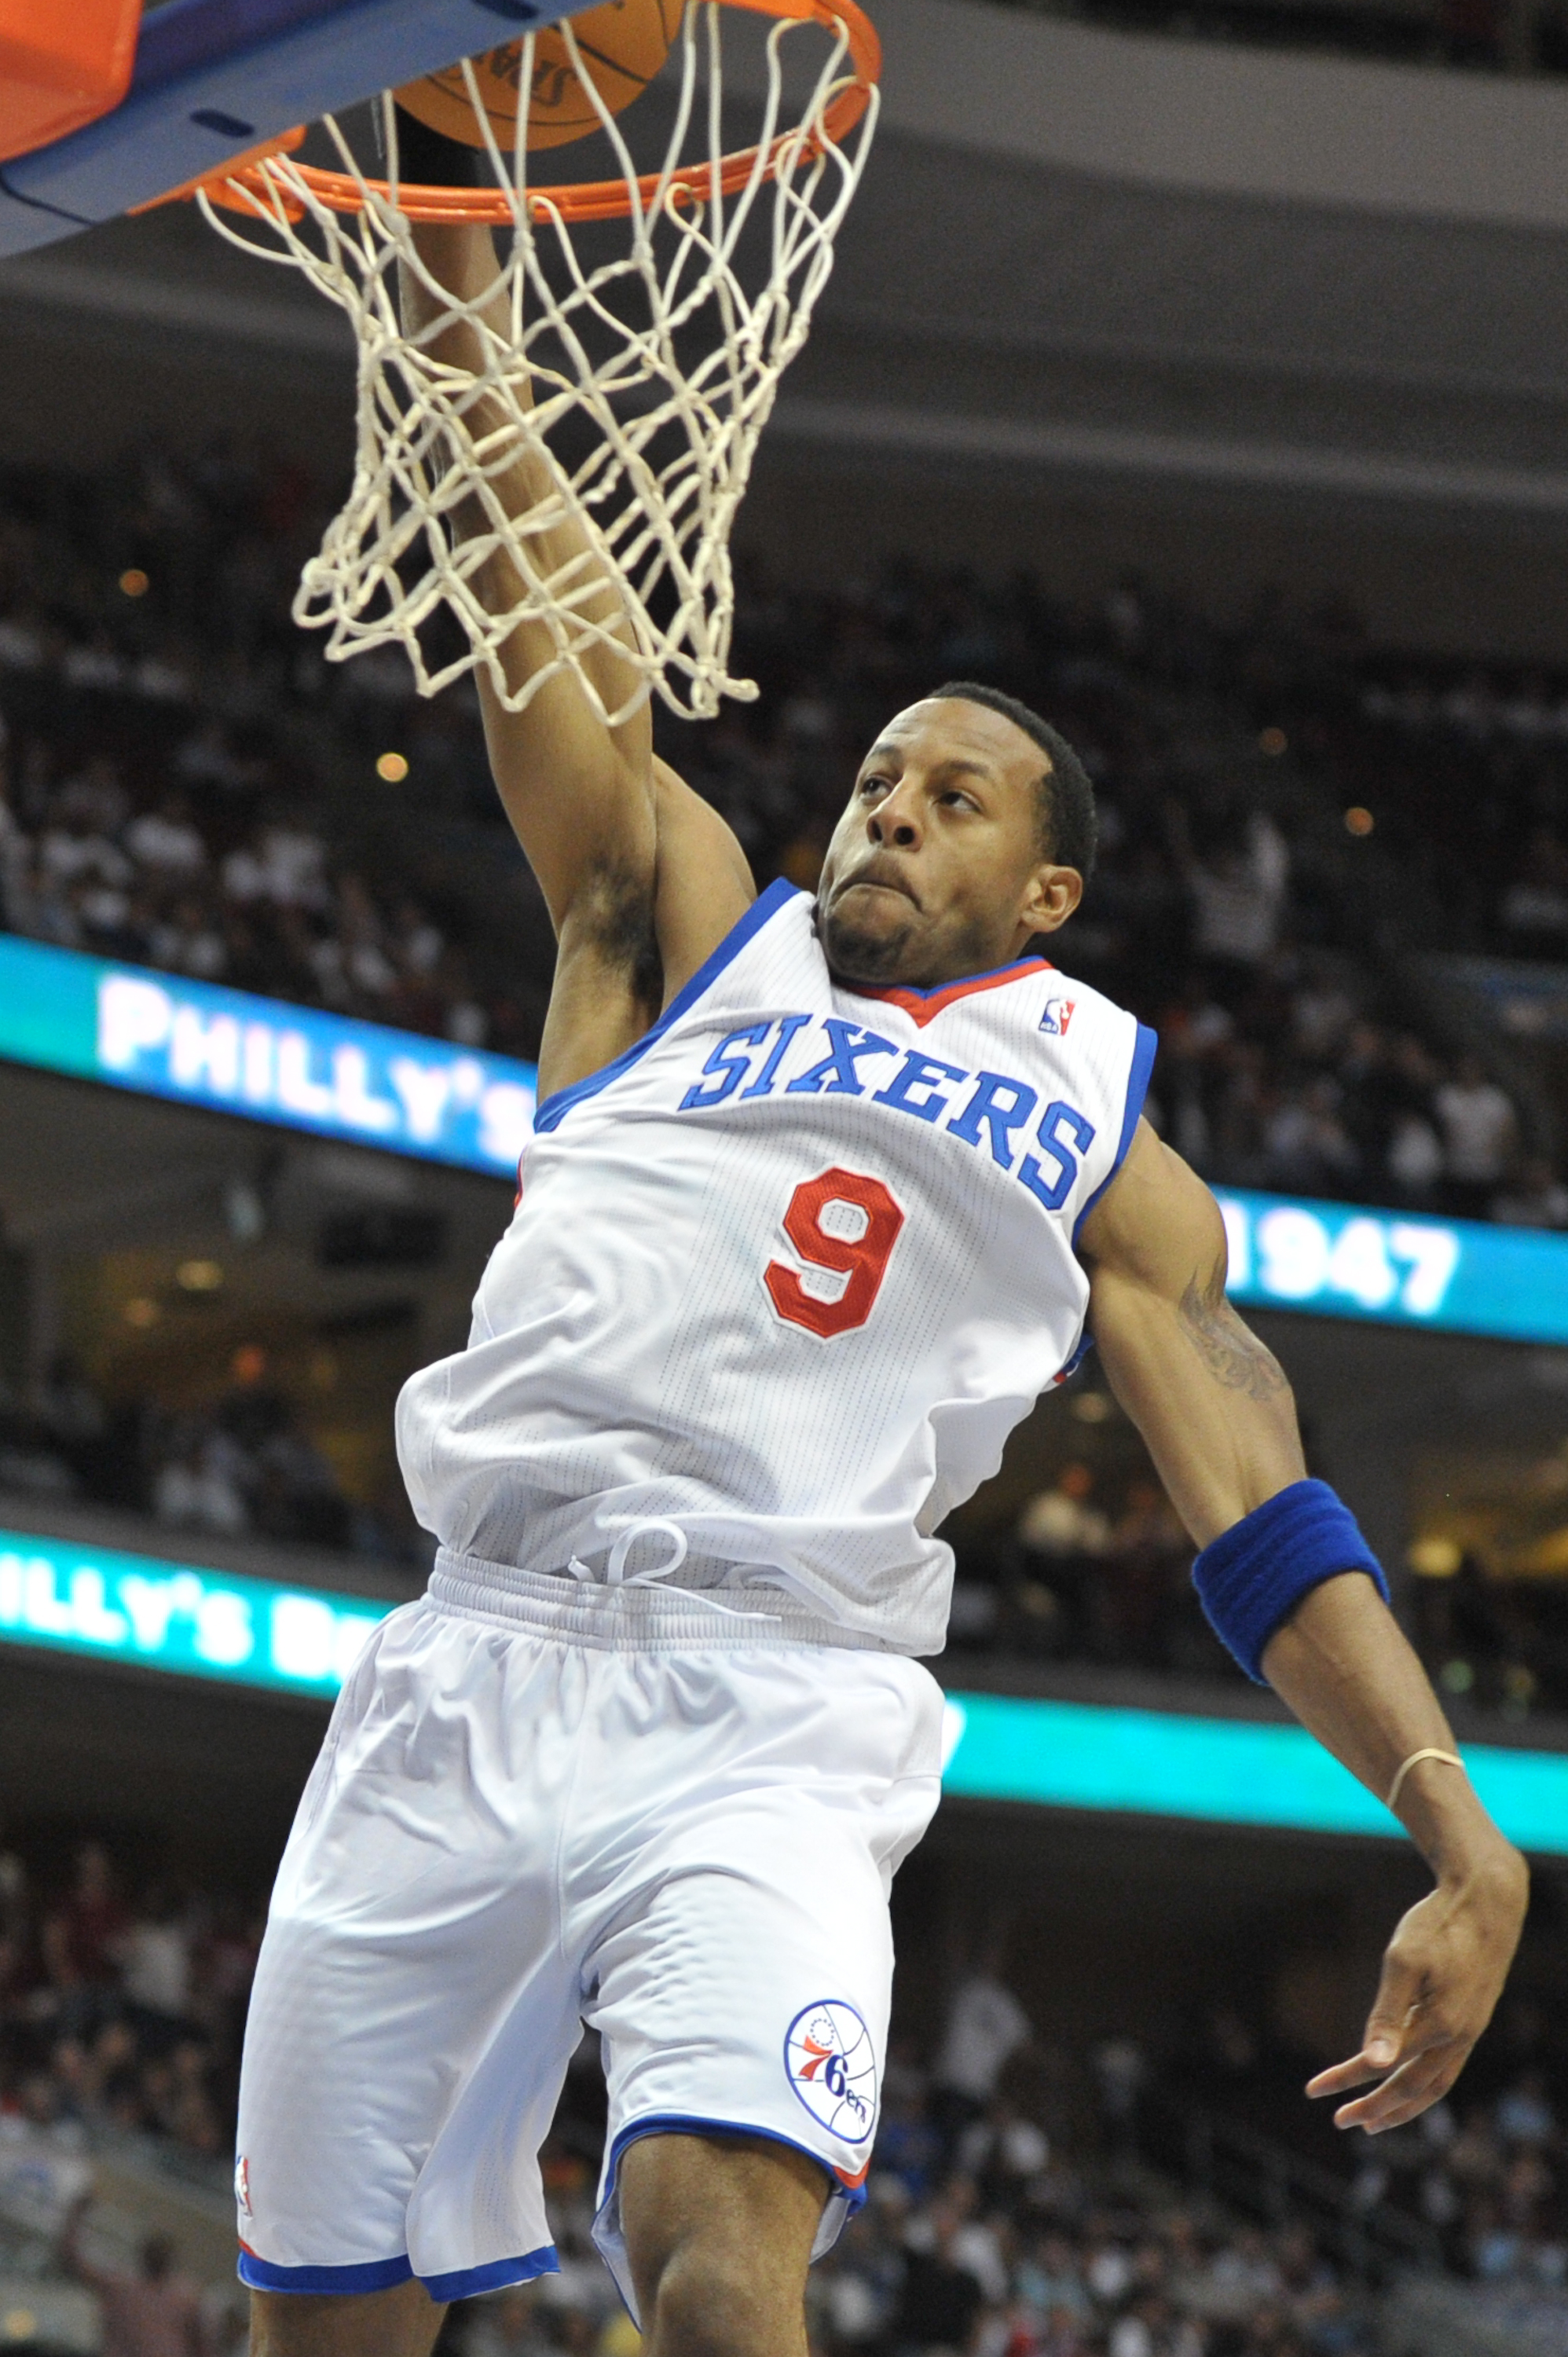 PHILADELPHIA - OCTOBER 27:  Andre Iguodala #9 of the Philadelphia 76ers in action during the game against the Miami Heat at the Wells Fargo Center on October 27, 2010 in Philadelphia, Pennsylvania. NOTE TO USER: User expressly acknowledges and agrees that